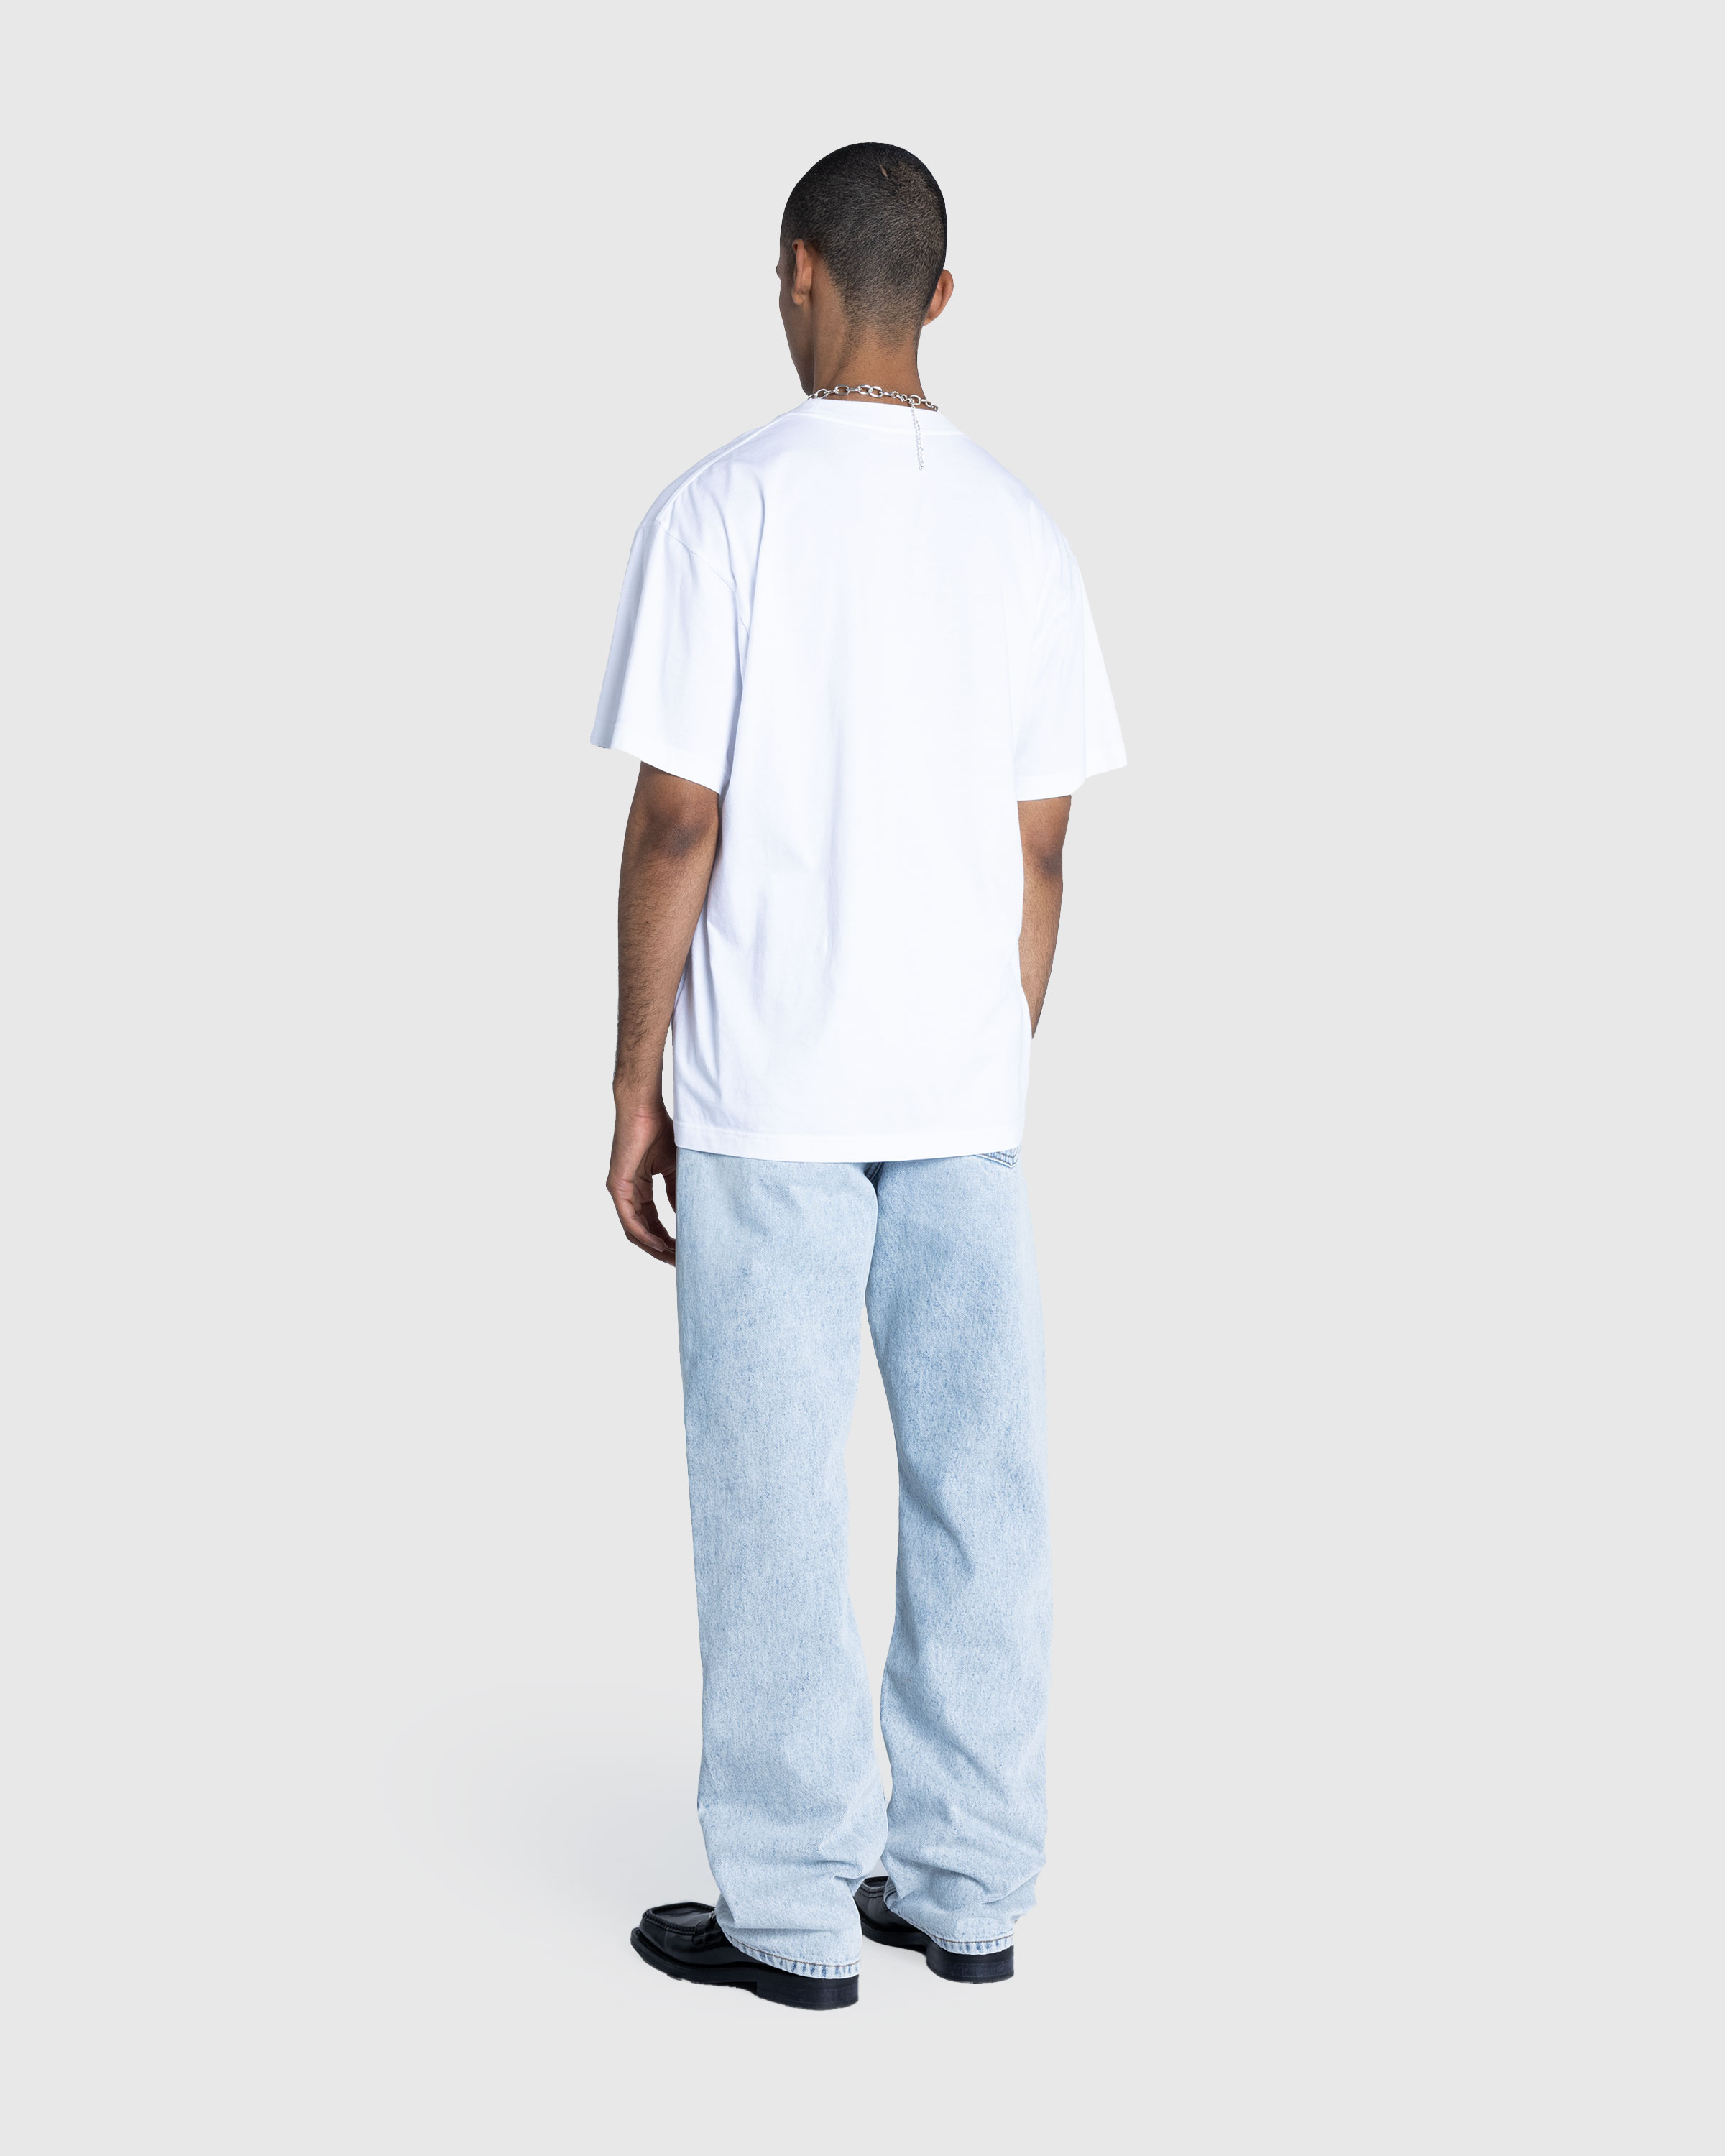 Y/Project x Highsnobiety – Not In Paris T-Shirt White - T-Shirts - White - Image 5